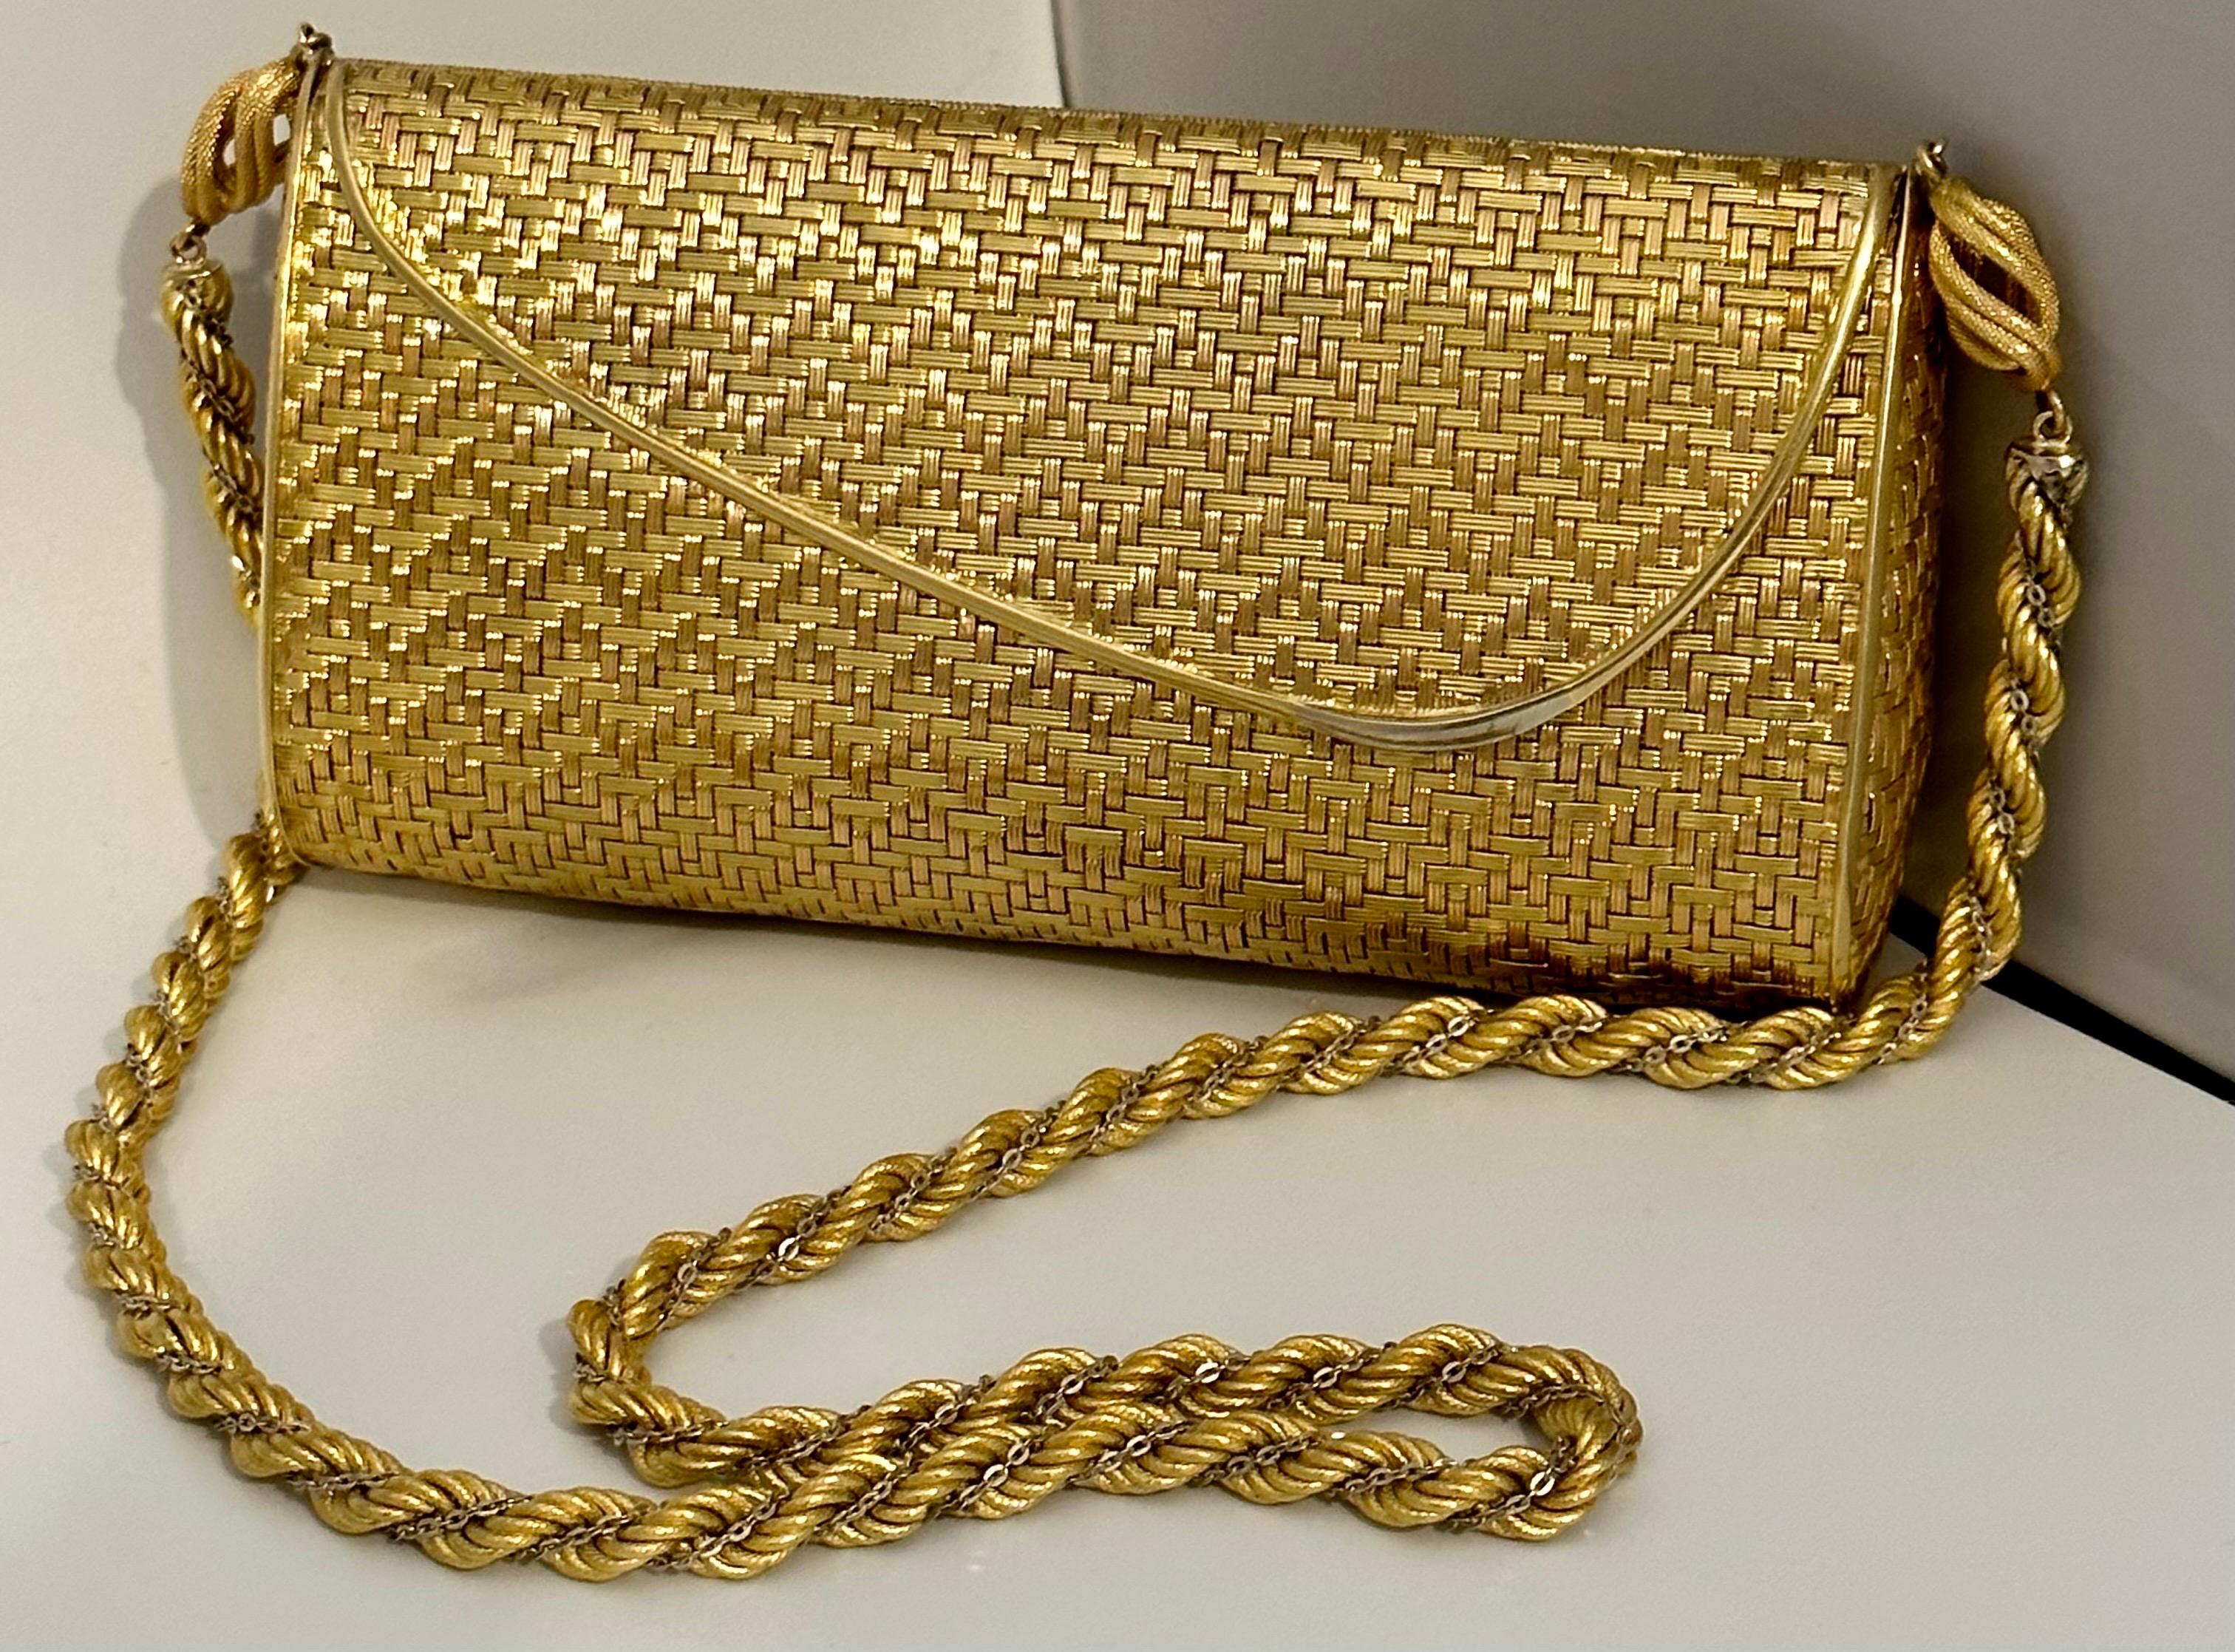 Cartier 18k Yellow Gold Mesh Purse Handbag with Shoulder Chain Rare 401 Gm In Excellent Condition For Sale In New York, NY